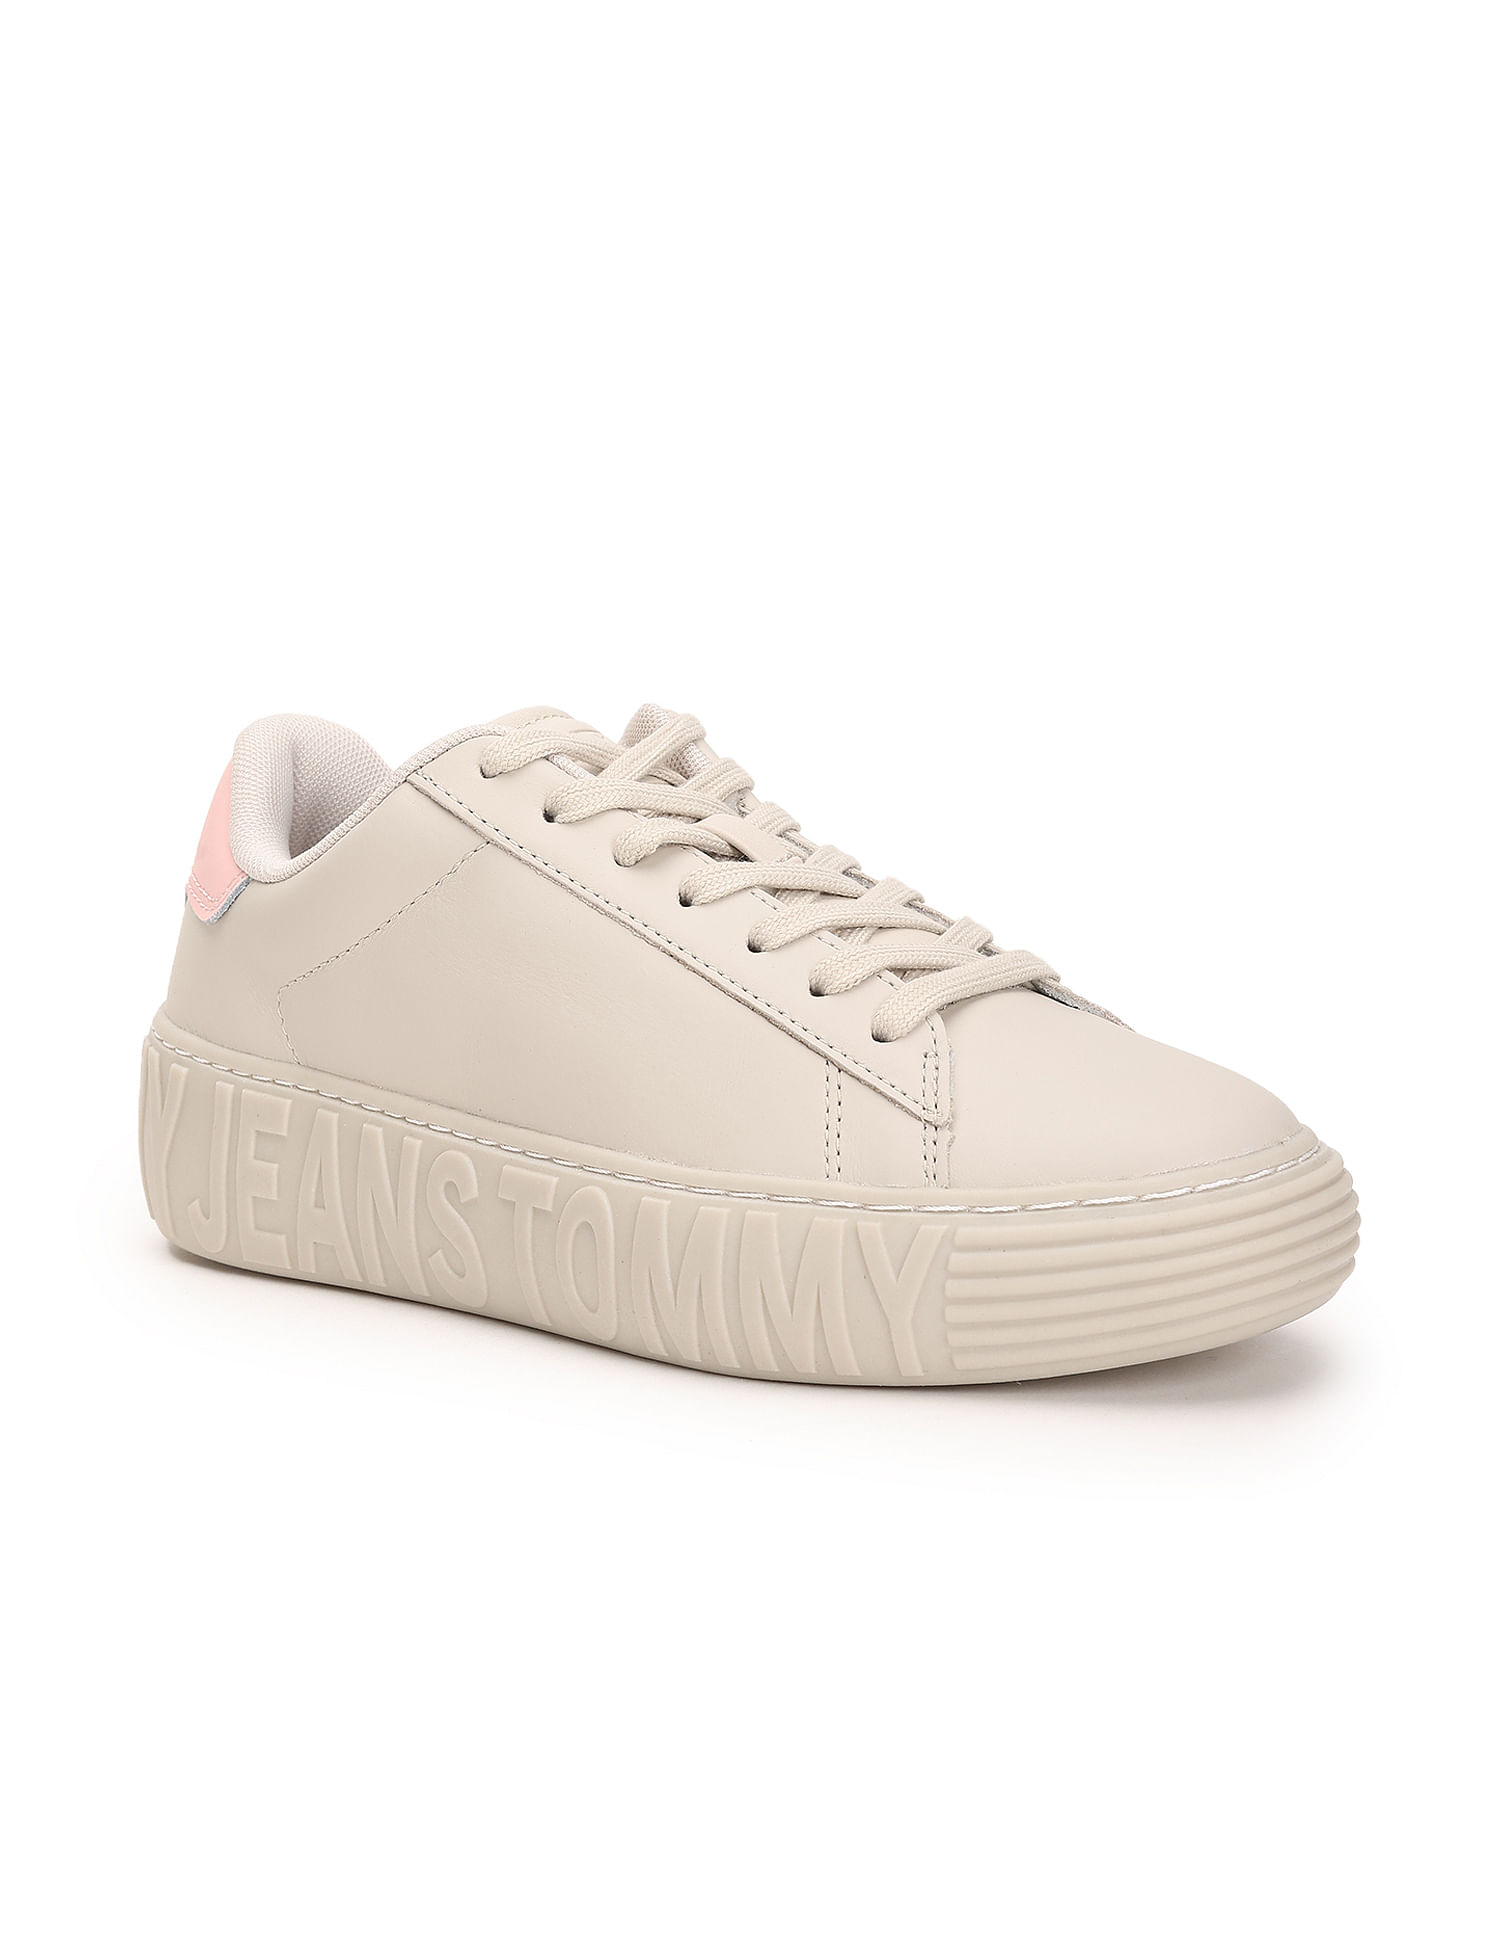 runner White Sneakers for Women - Fall/Winter collection - Camper India